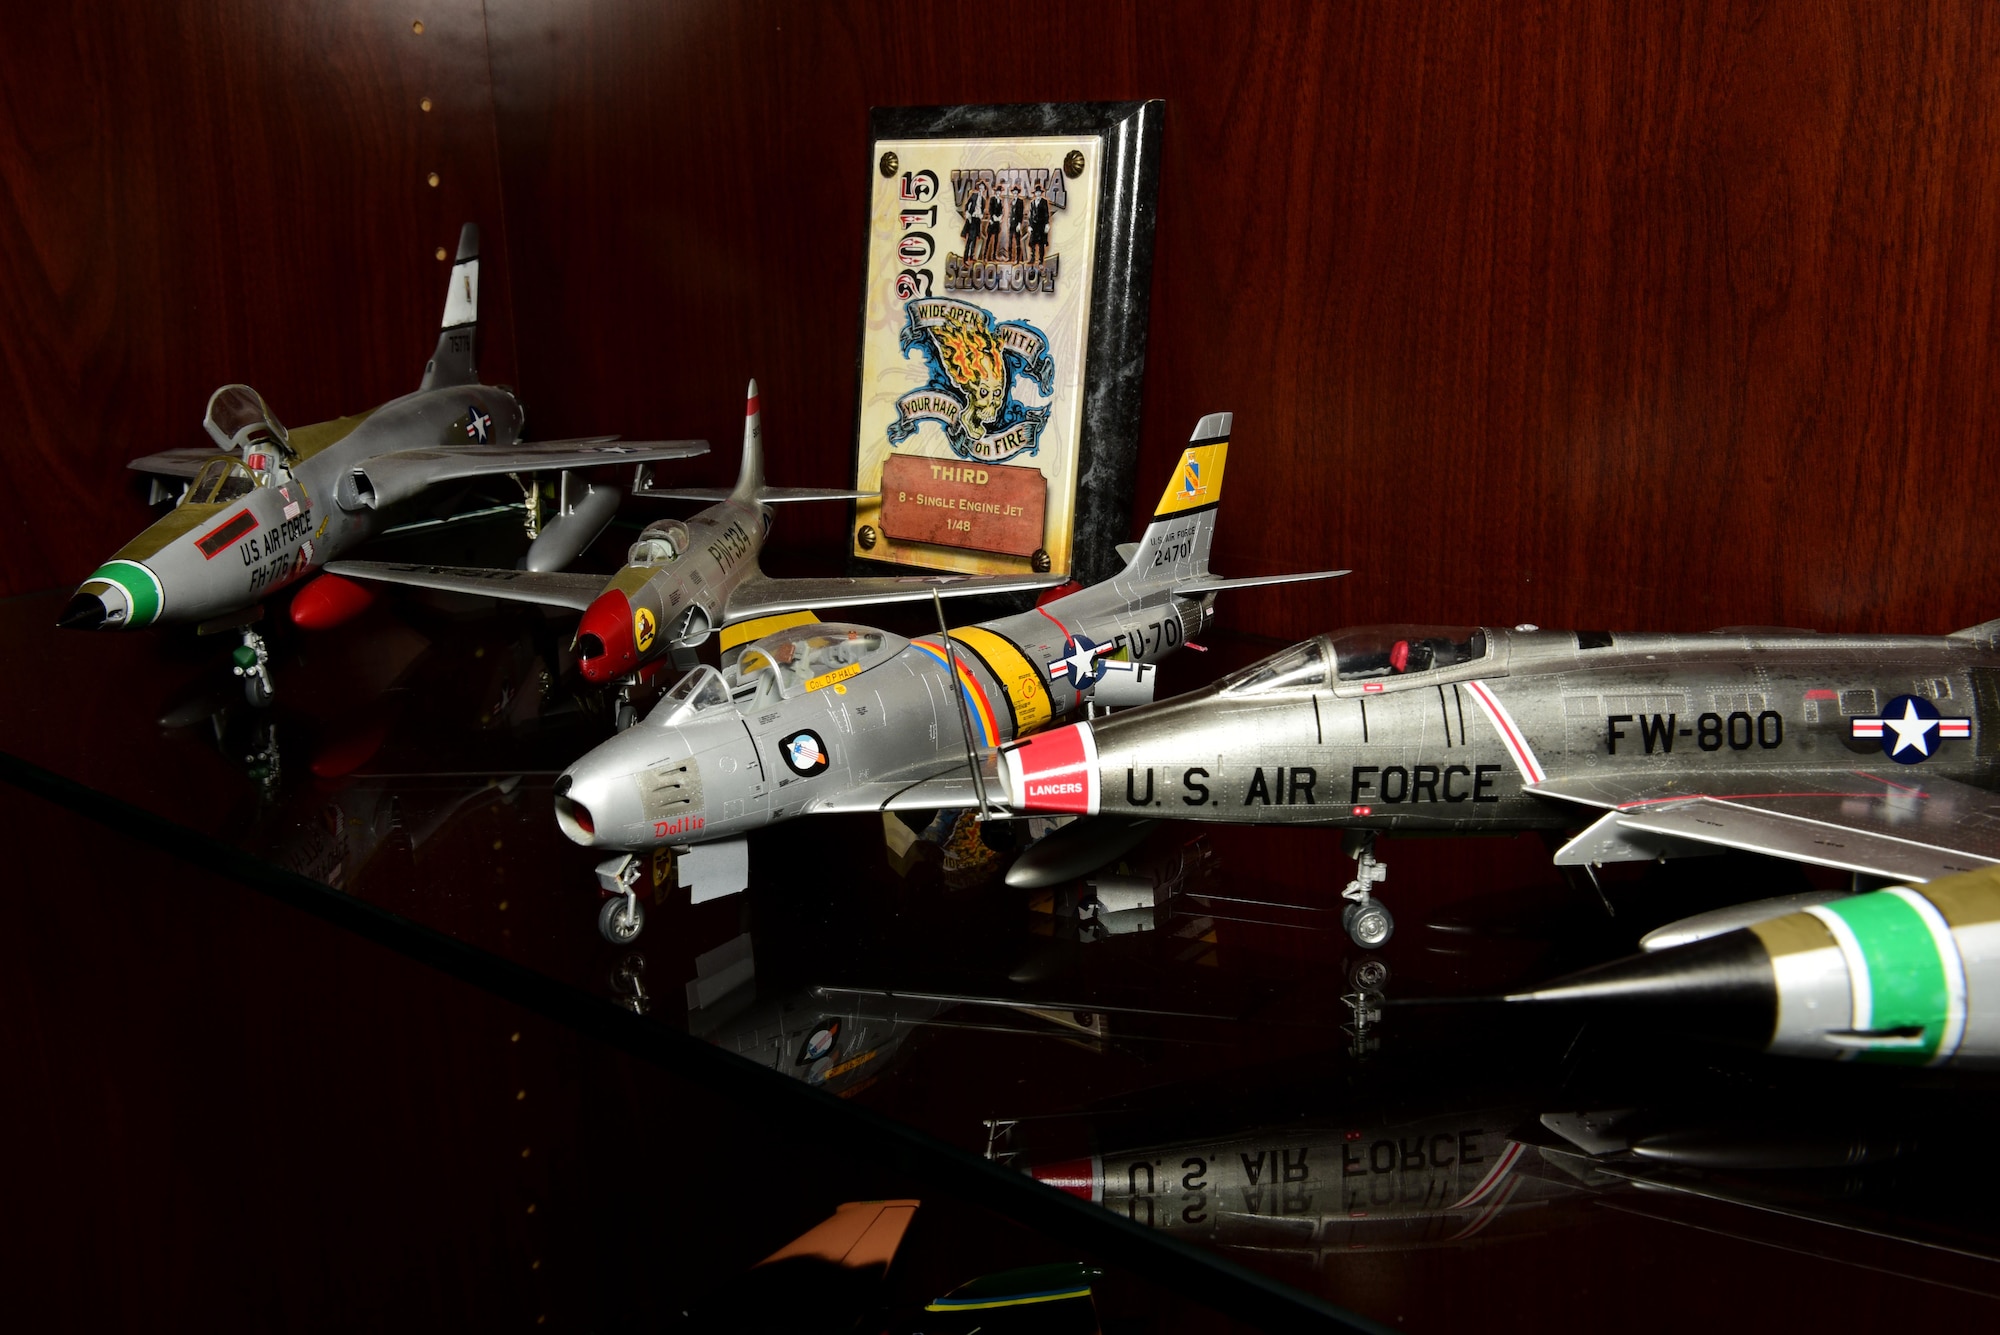 Model aircraft built by retired Tech. Sgt. Bob Dedmon sit on display in the 4th Mission Support Group building, Sept. 27, 2017, at Seymour Johnson Air Force Base, North Carolina.